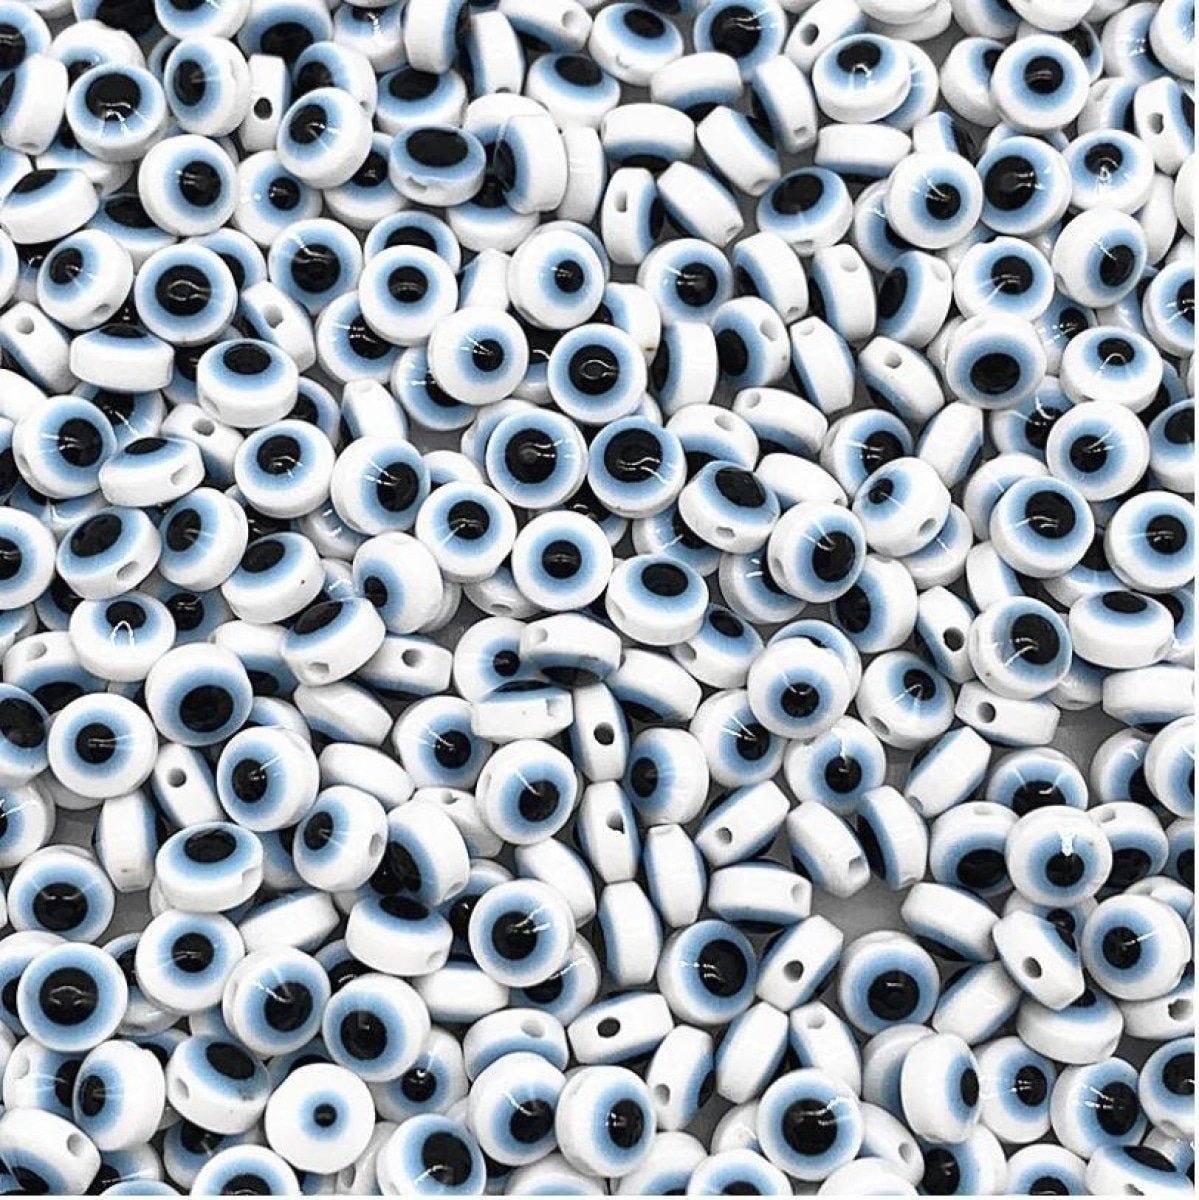 48pcs 8/10mm Oval Resin Spacer Beads Double Sided Eyes for Jewellery Making DIY Bracelet Beads Set B - White & Blue 8mm - - Asia Sell